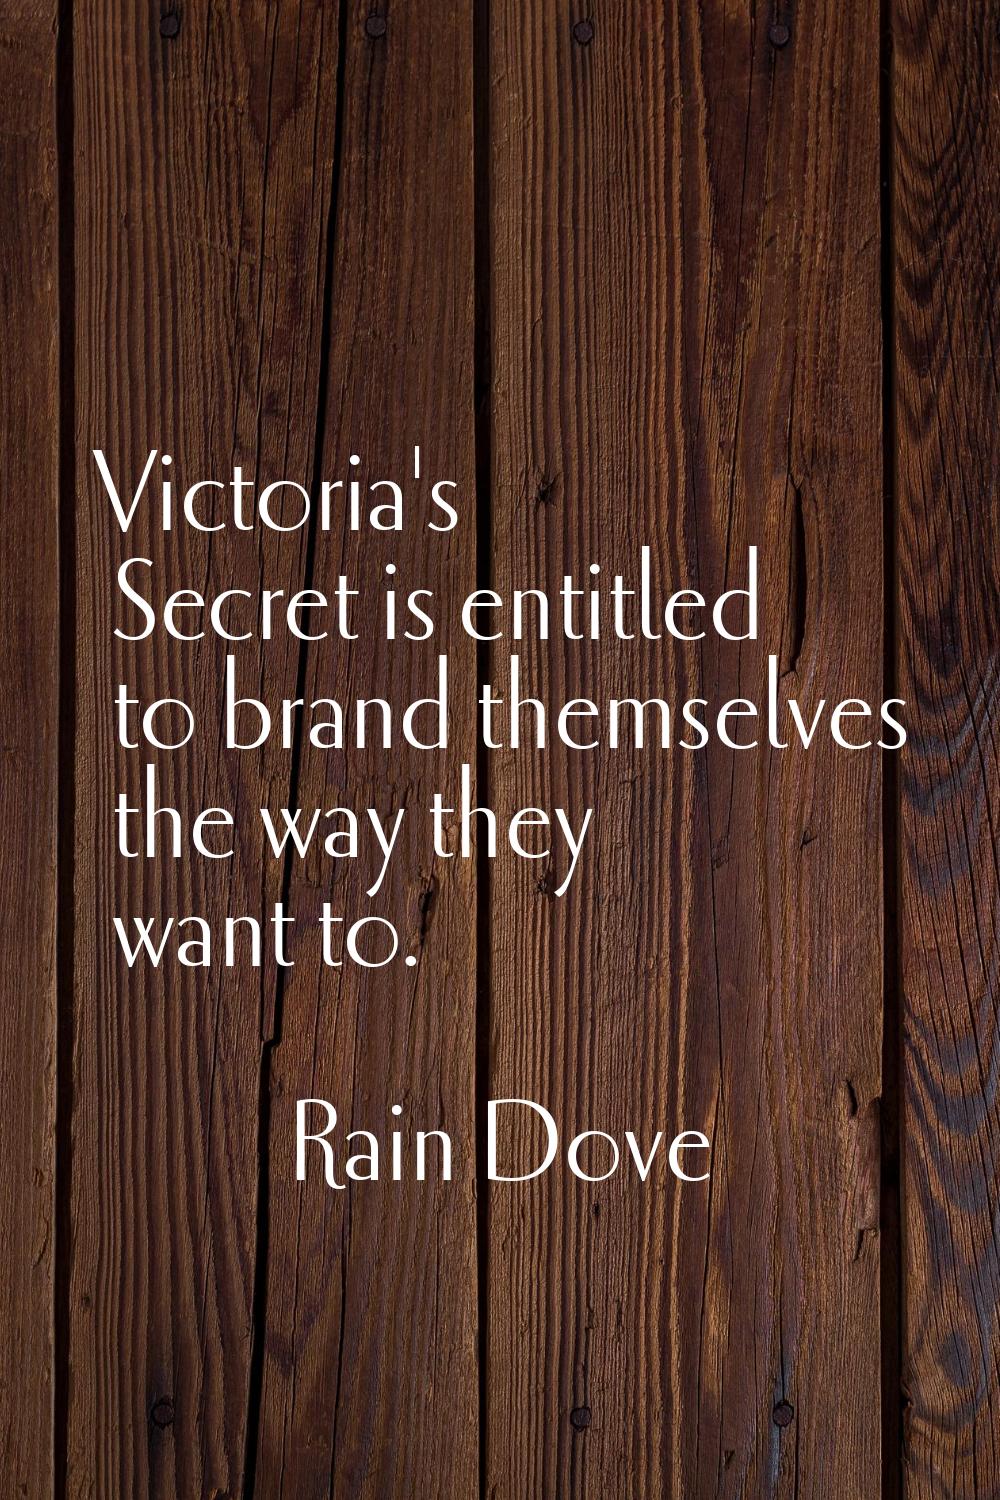 Victoria's Secret is entitled to brand themselves the way they want to.